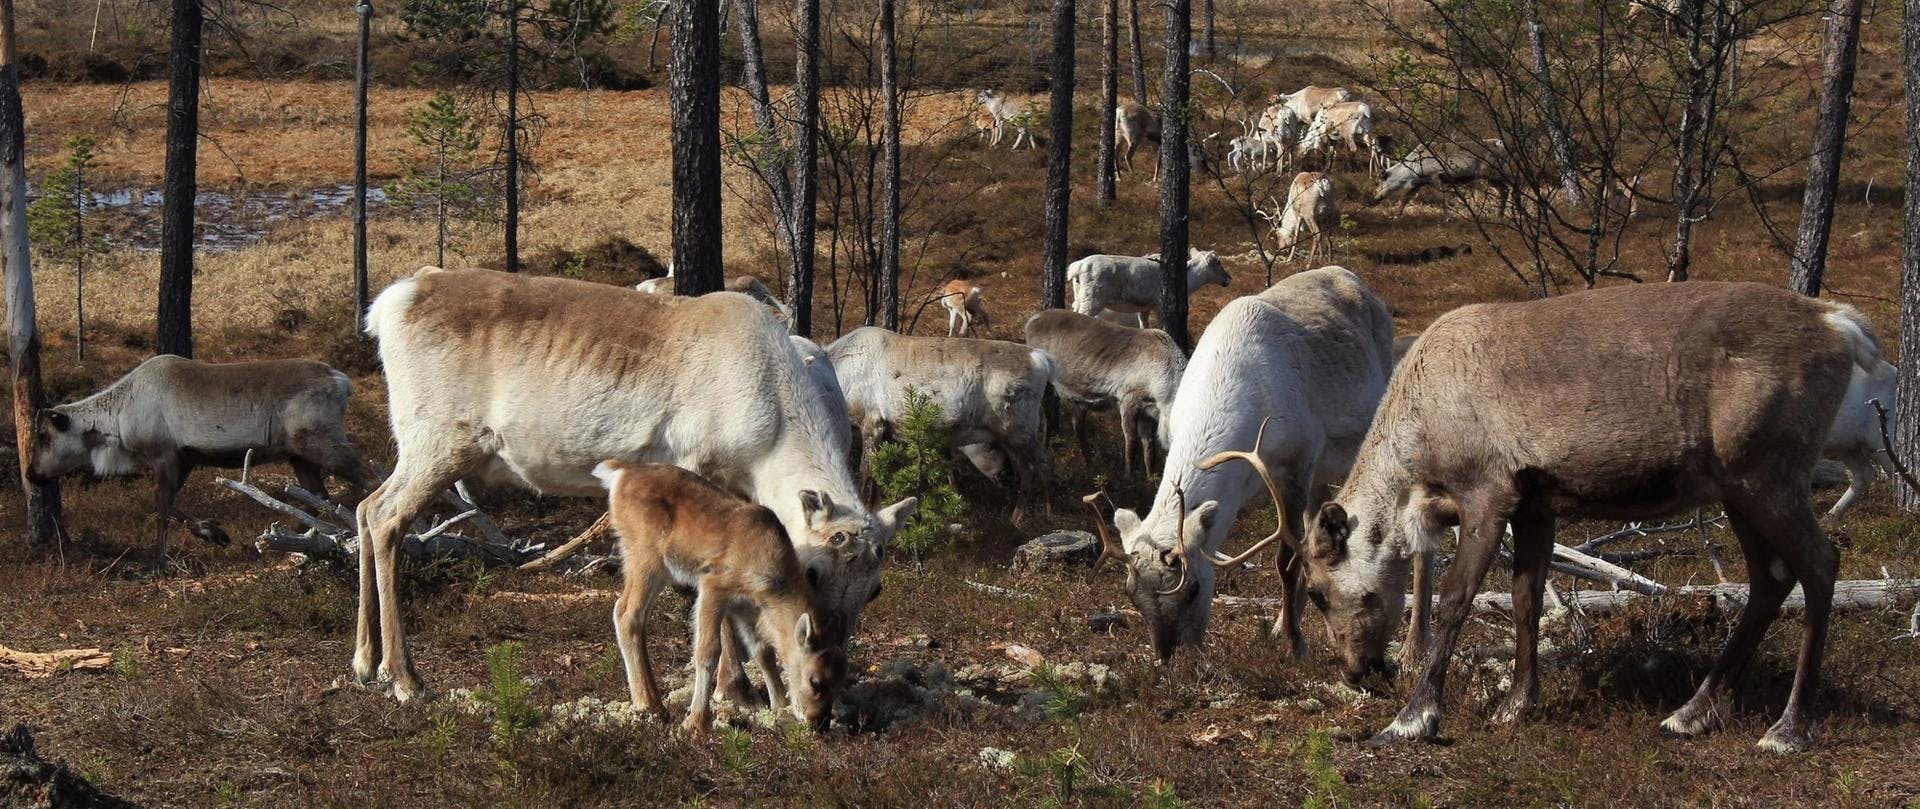 Reindeer farms and safaris in Pyhä-Luosto